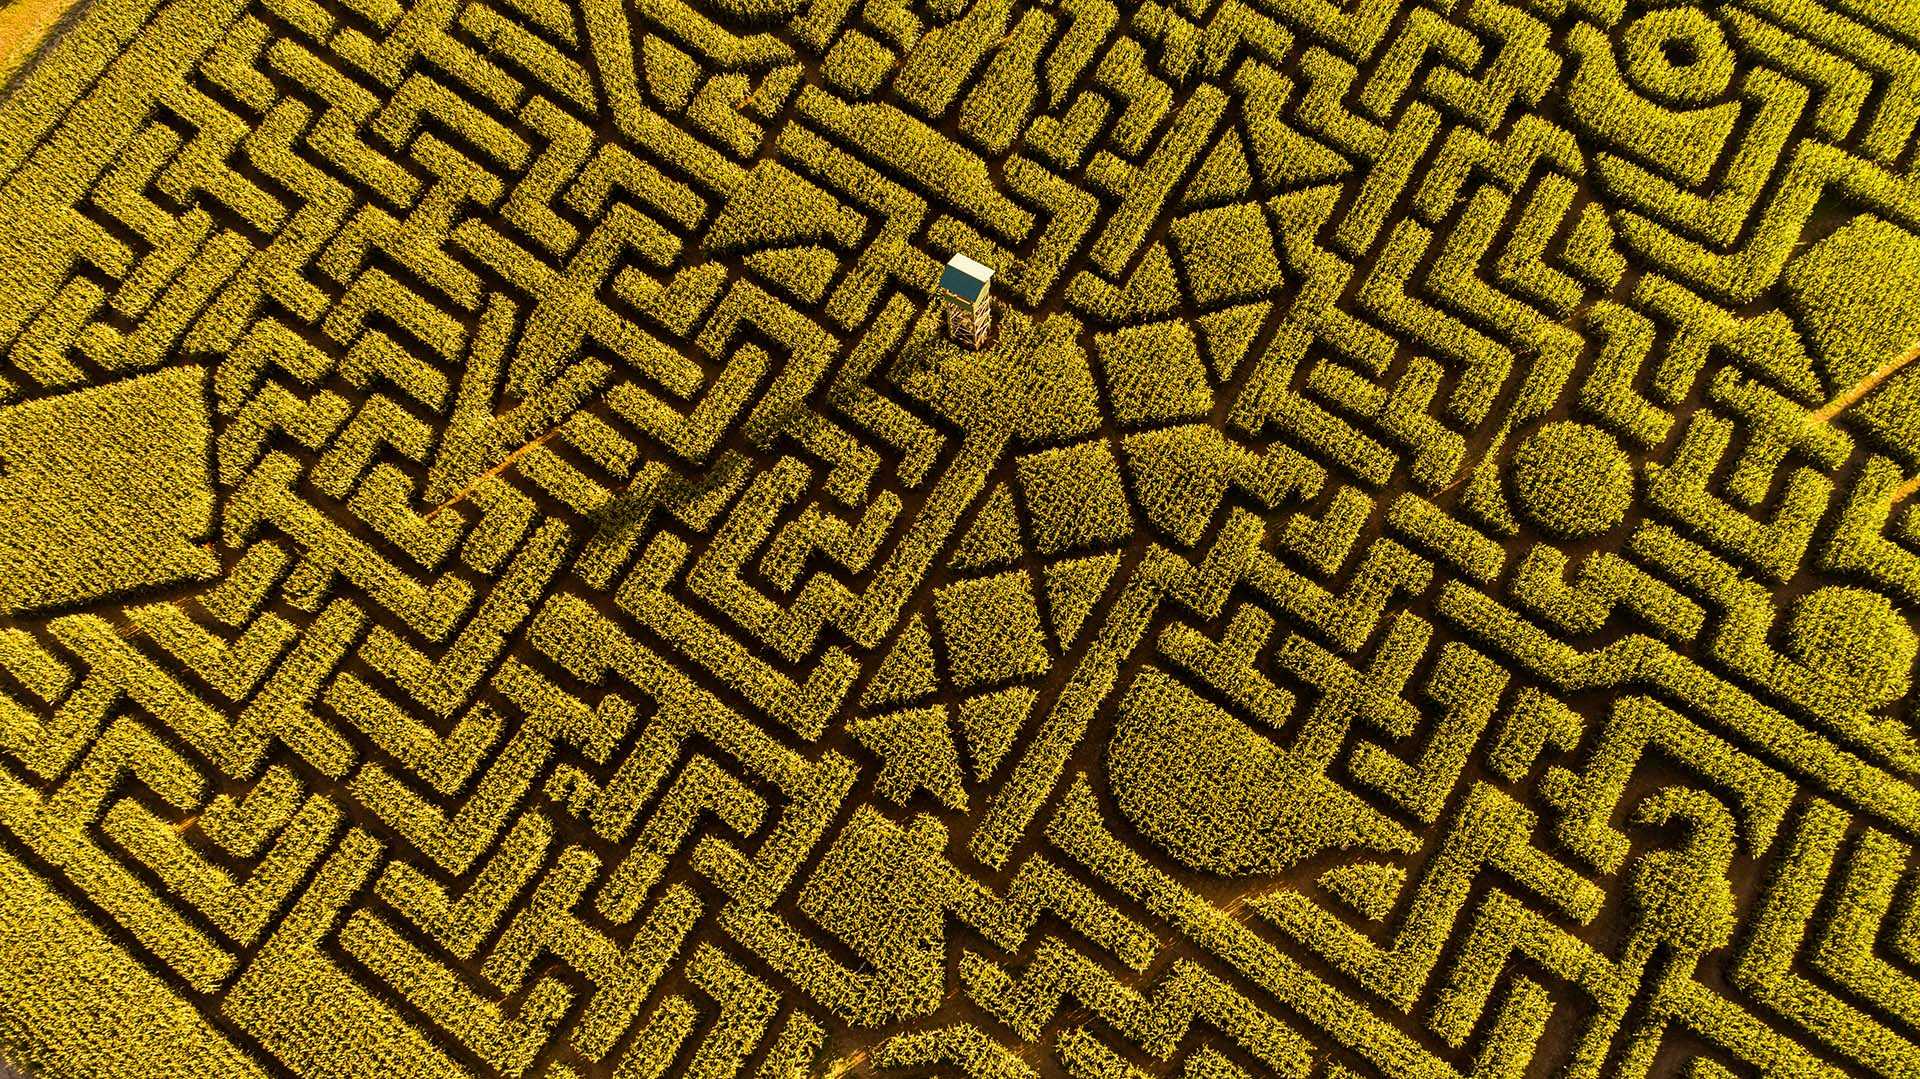 Maze from above